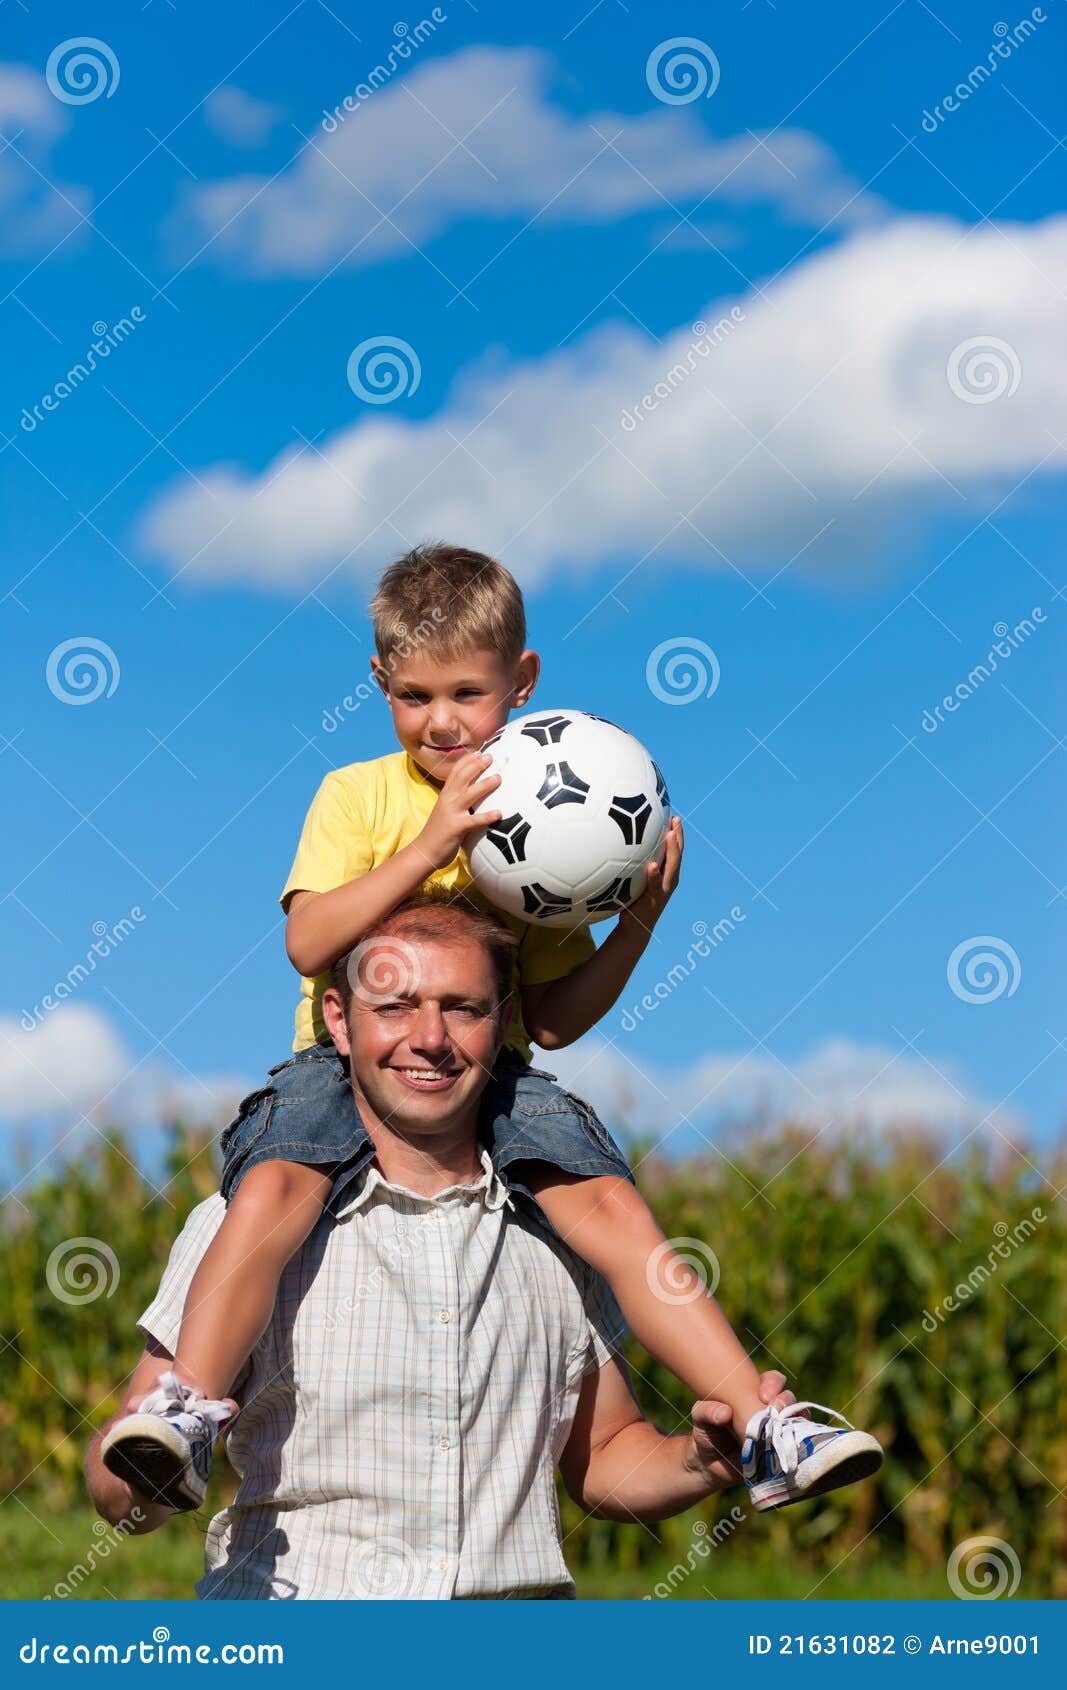 Father And Son With Football Stock Photography - Image: 21631082